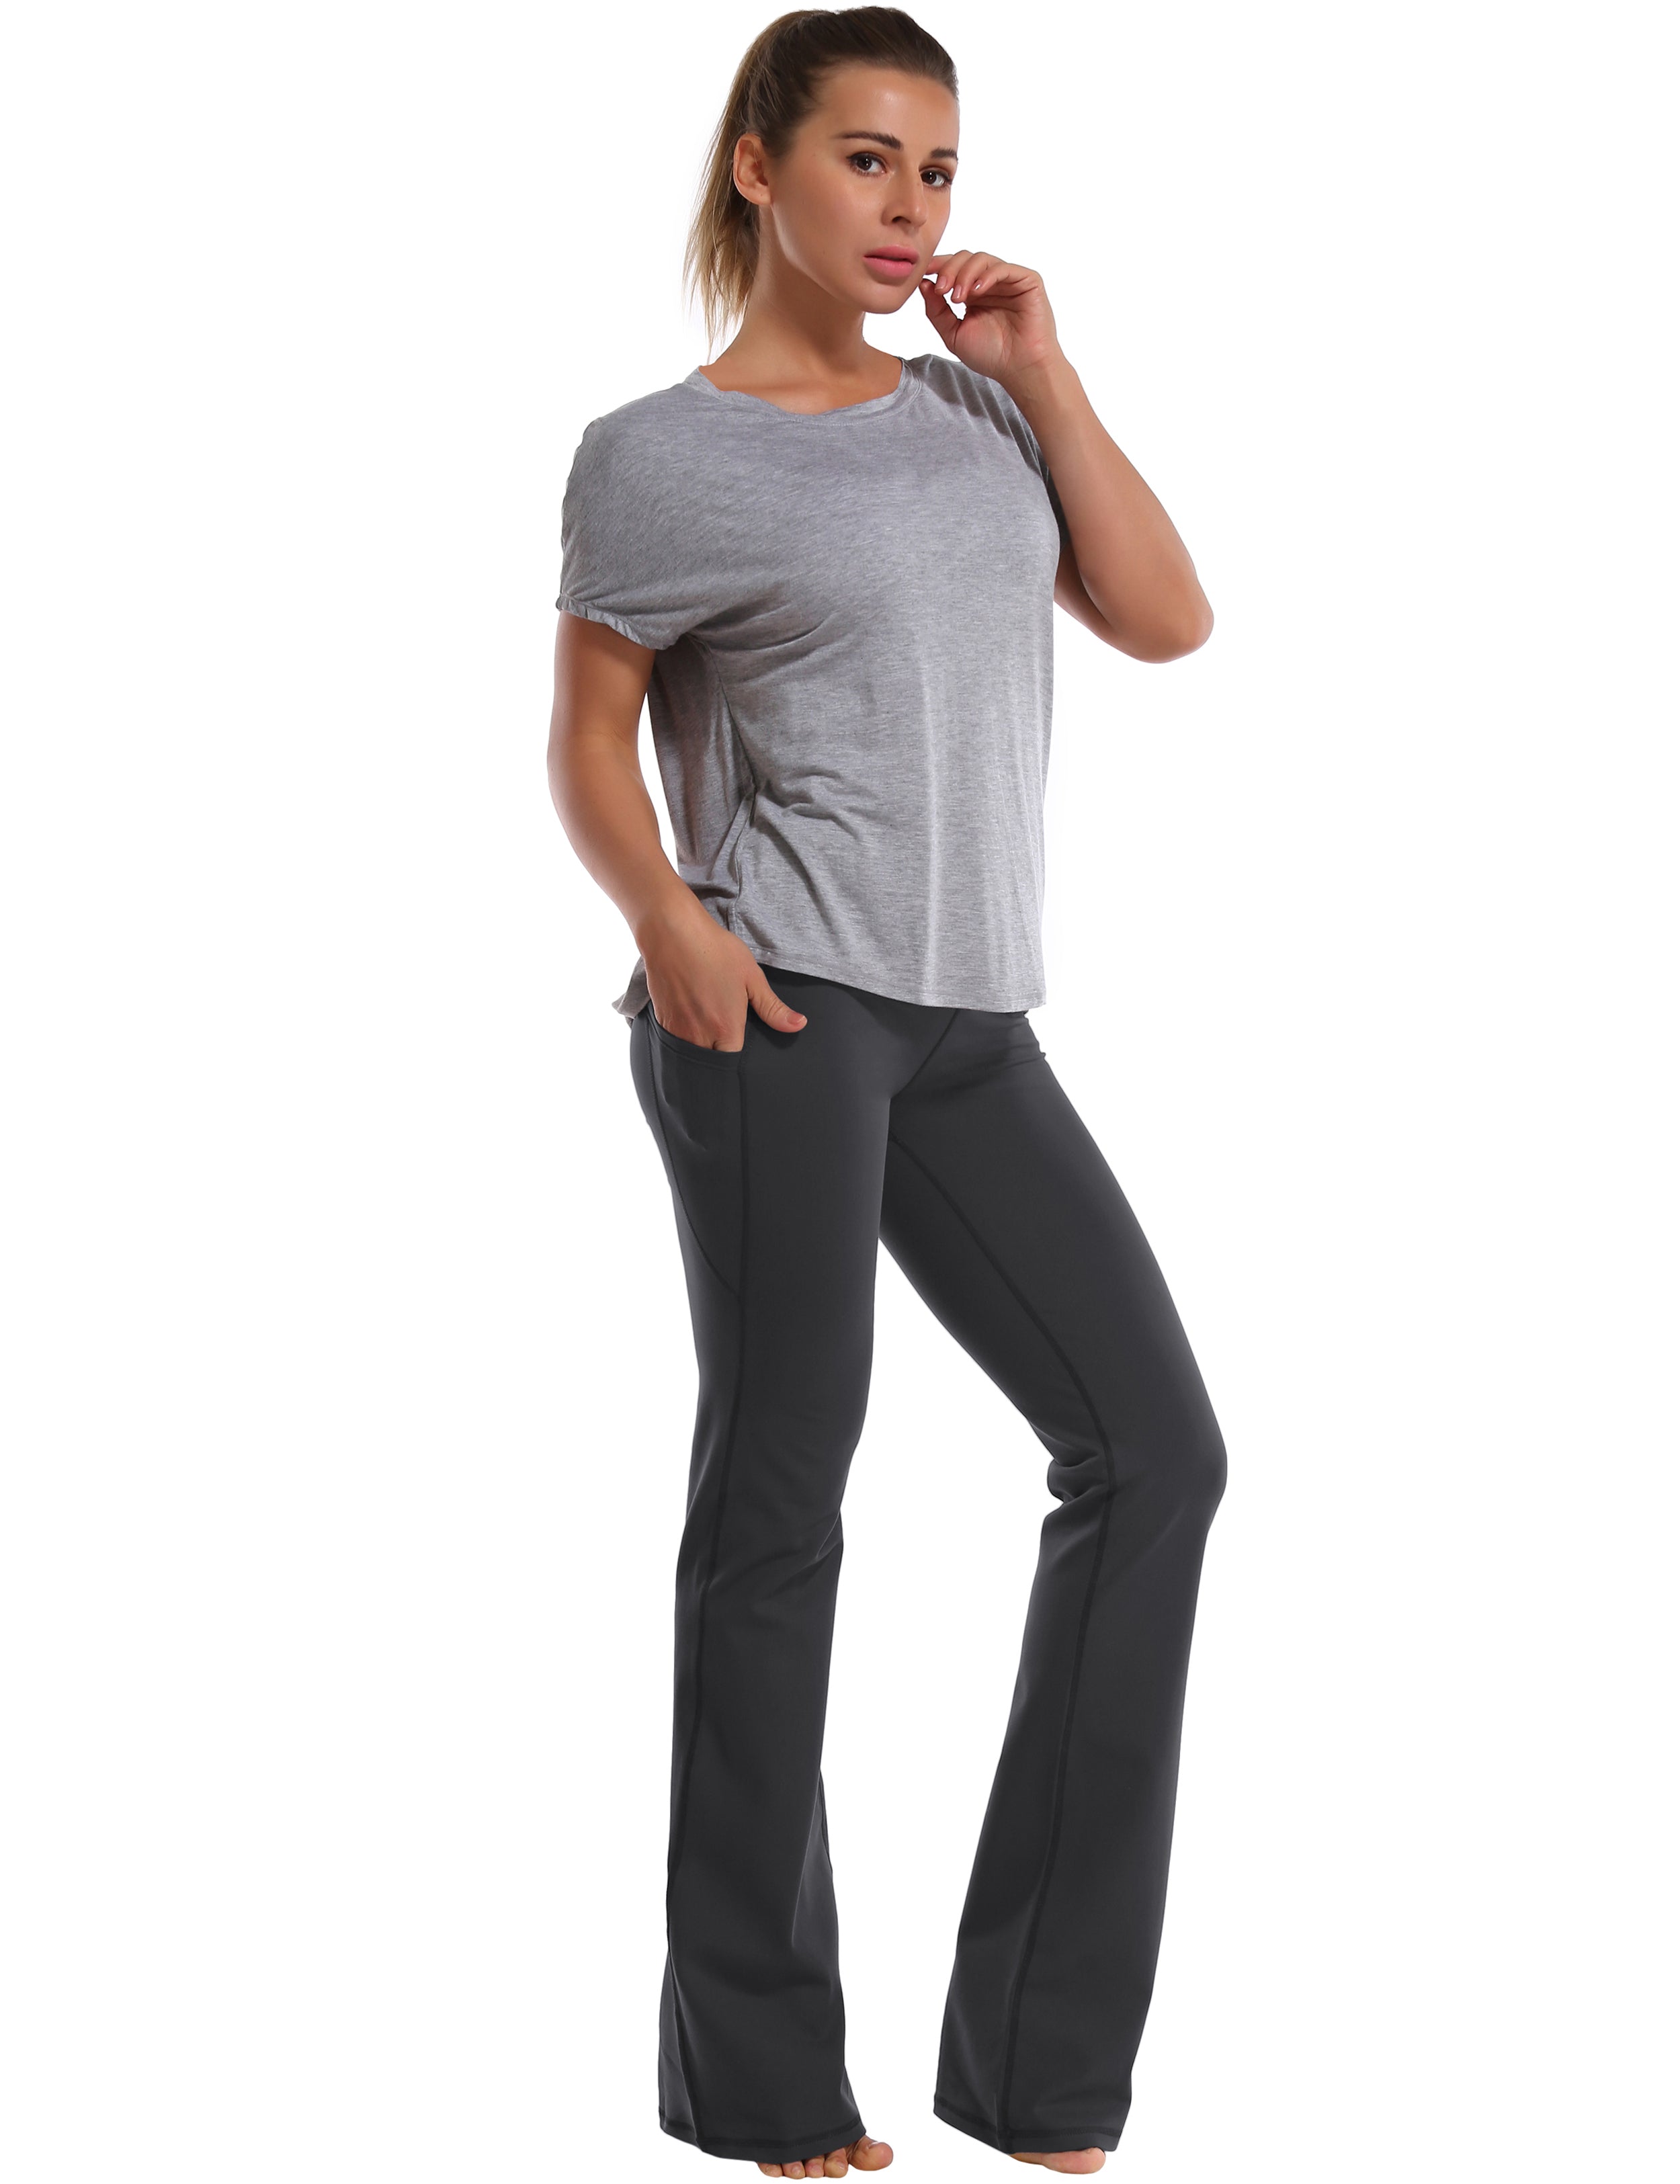 139 Side Pockets Bootcut Leggings shadowcharcoal 87%Nylon/13%Spandex Fabric doesn't attract lint easily 4-way stretch No see-through Moisture-wicking Tummy control Inner pocket Four lengths